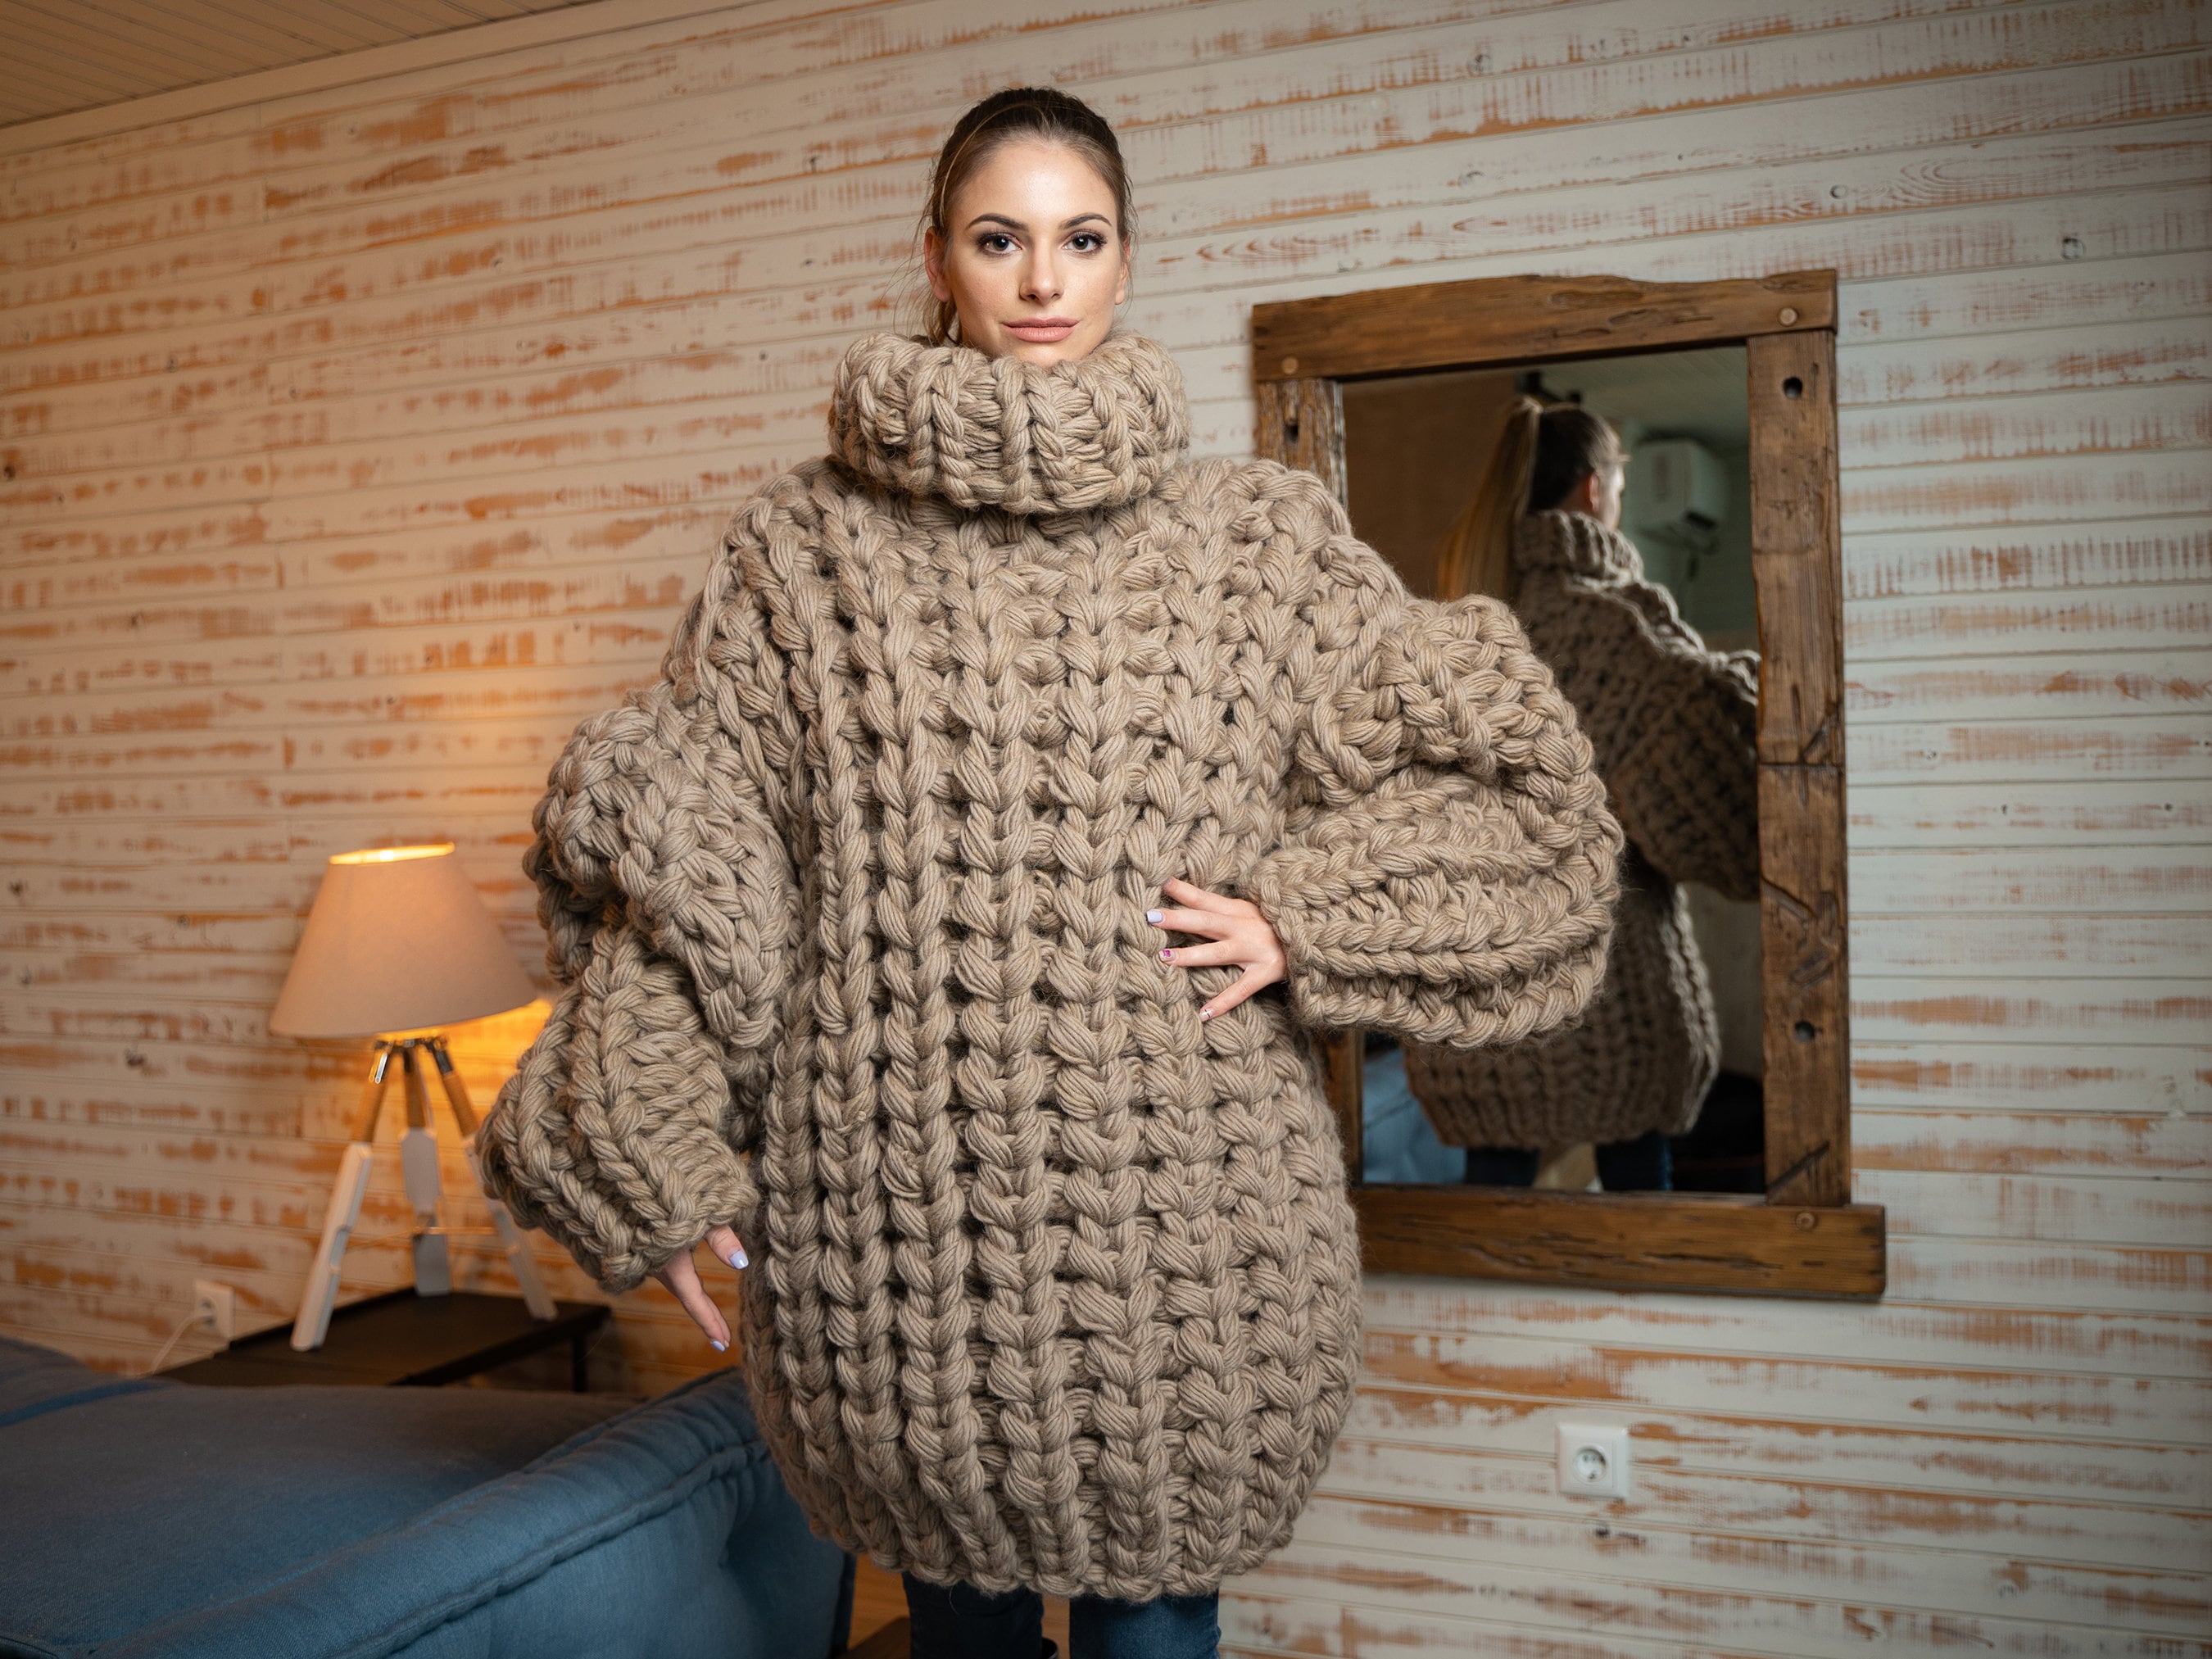 6 Kilograms Huge Hand Knit Wool Sweater Made of 100 % Soft Wool T1101 -   Norway